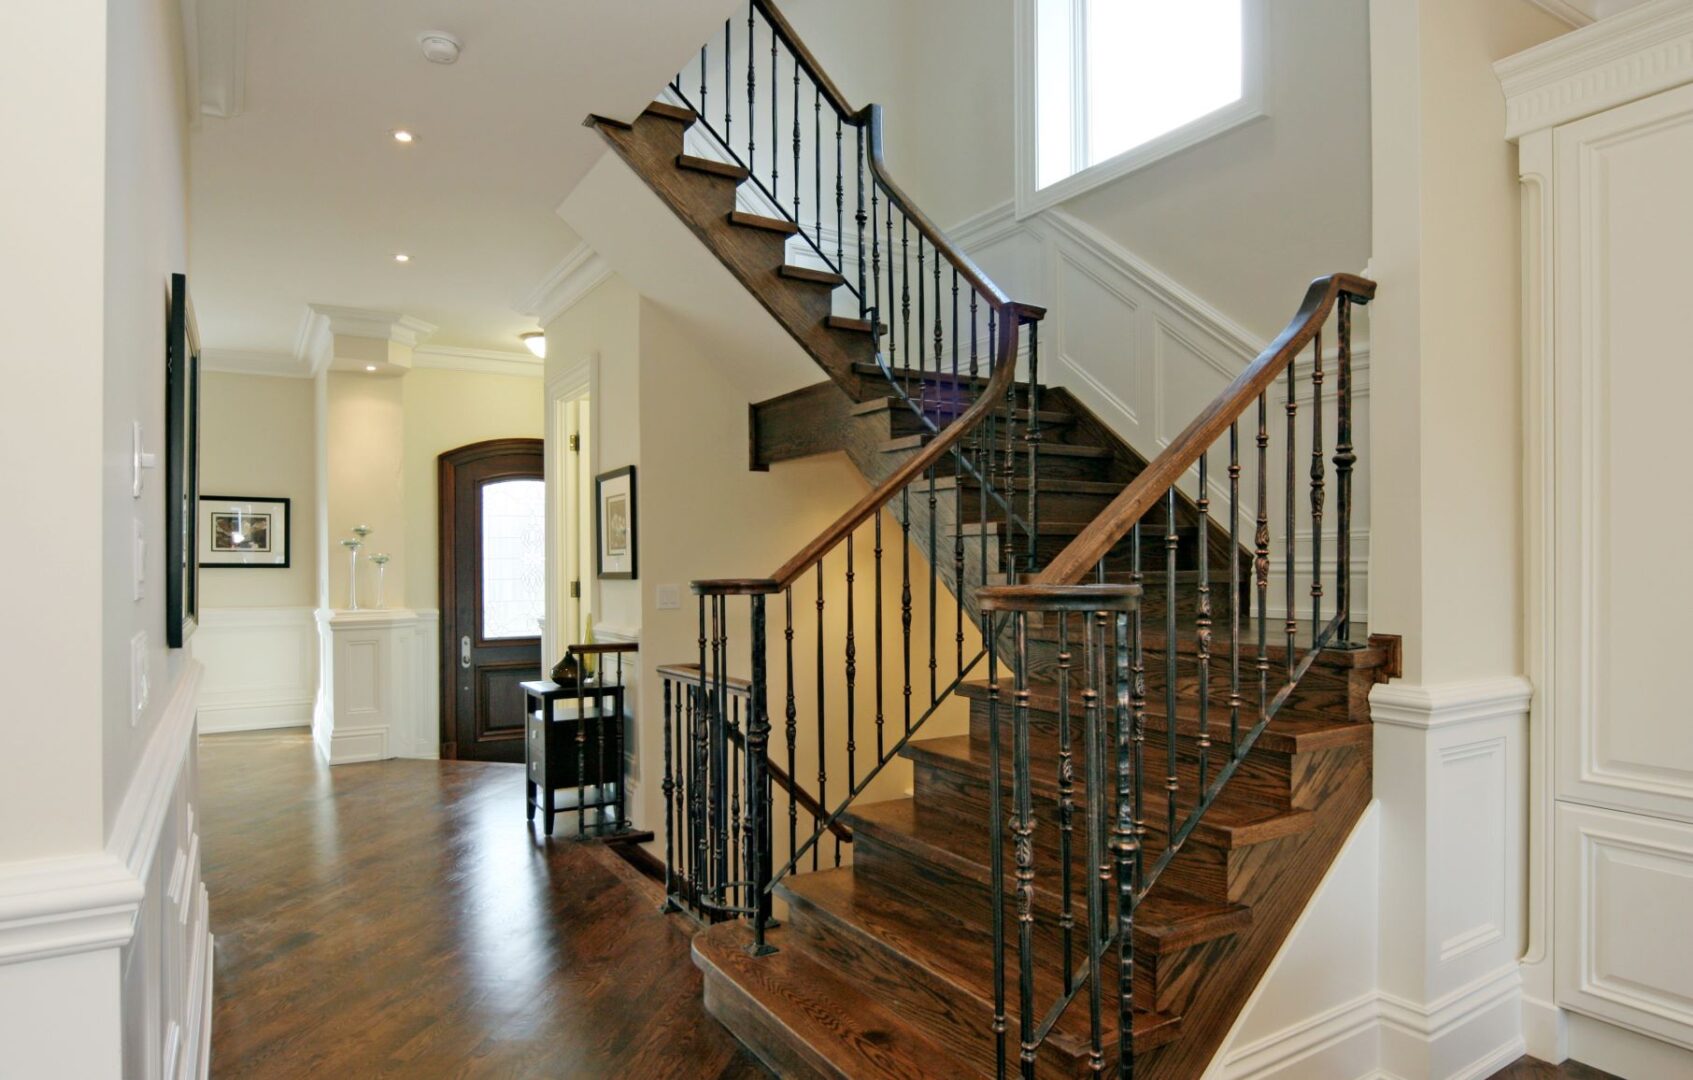 A Metallic Railing of a Stair With Wooden Railing